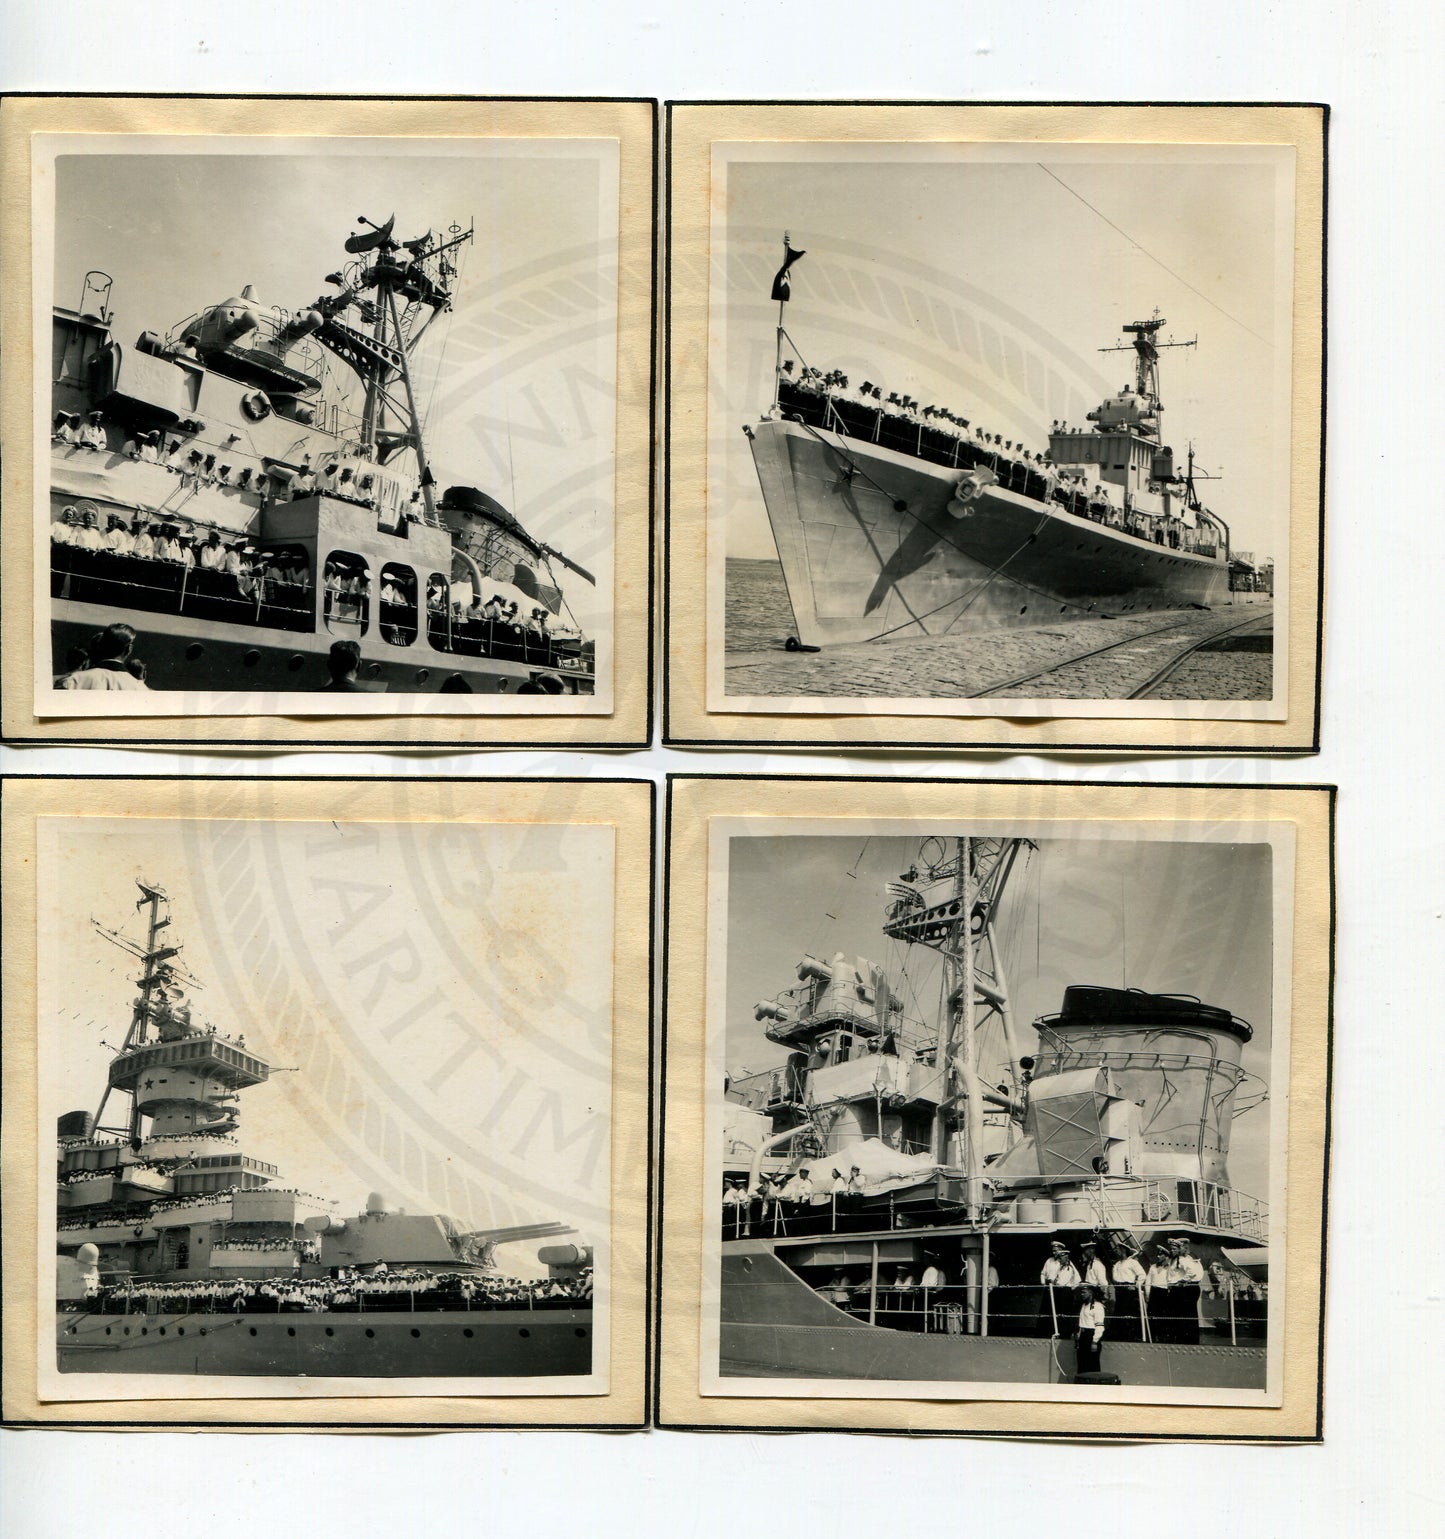 Official U.S. Navy photo of Soviet warship - Annapolis Maritime Antiques